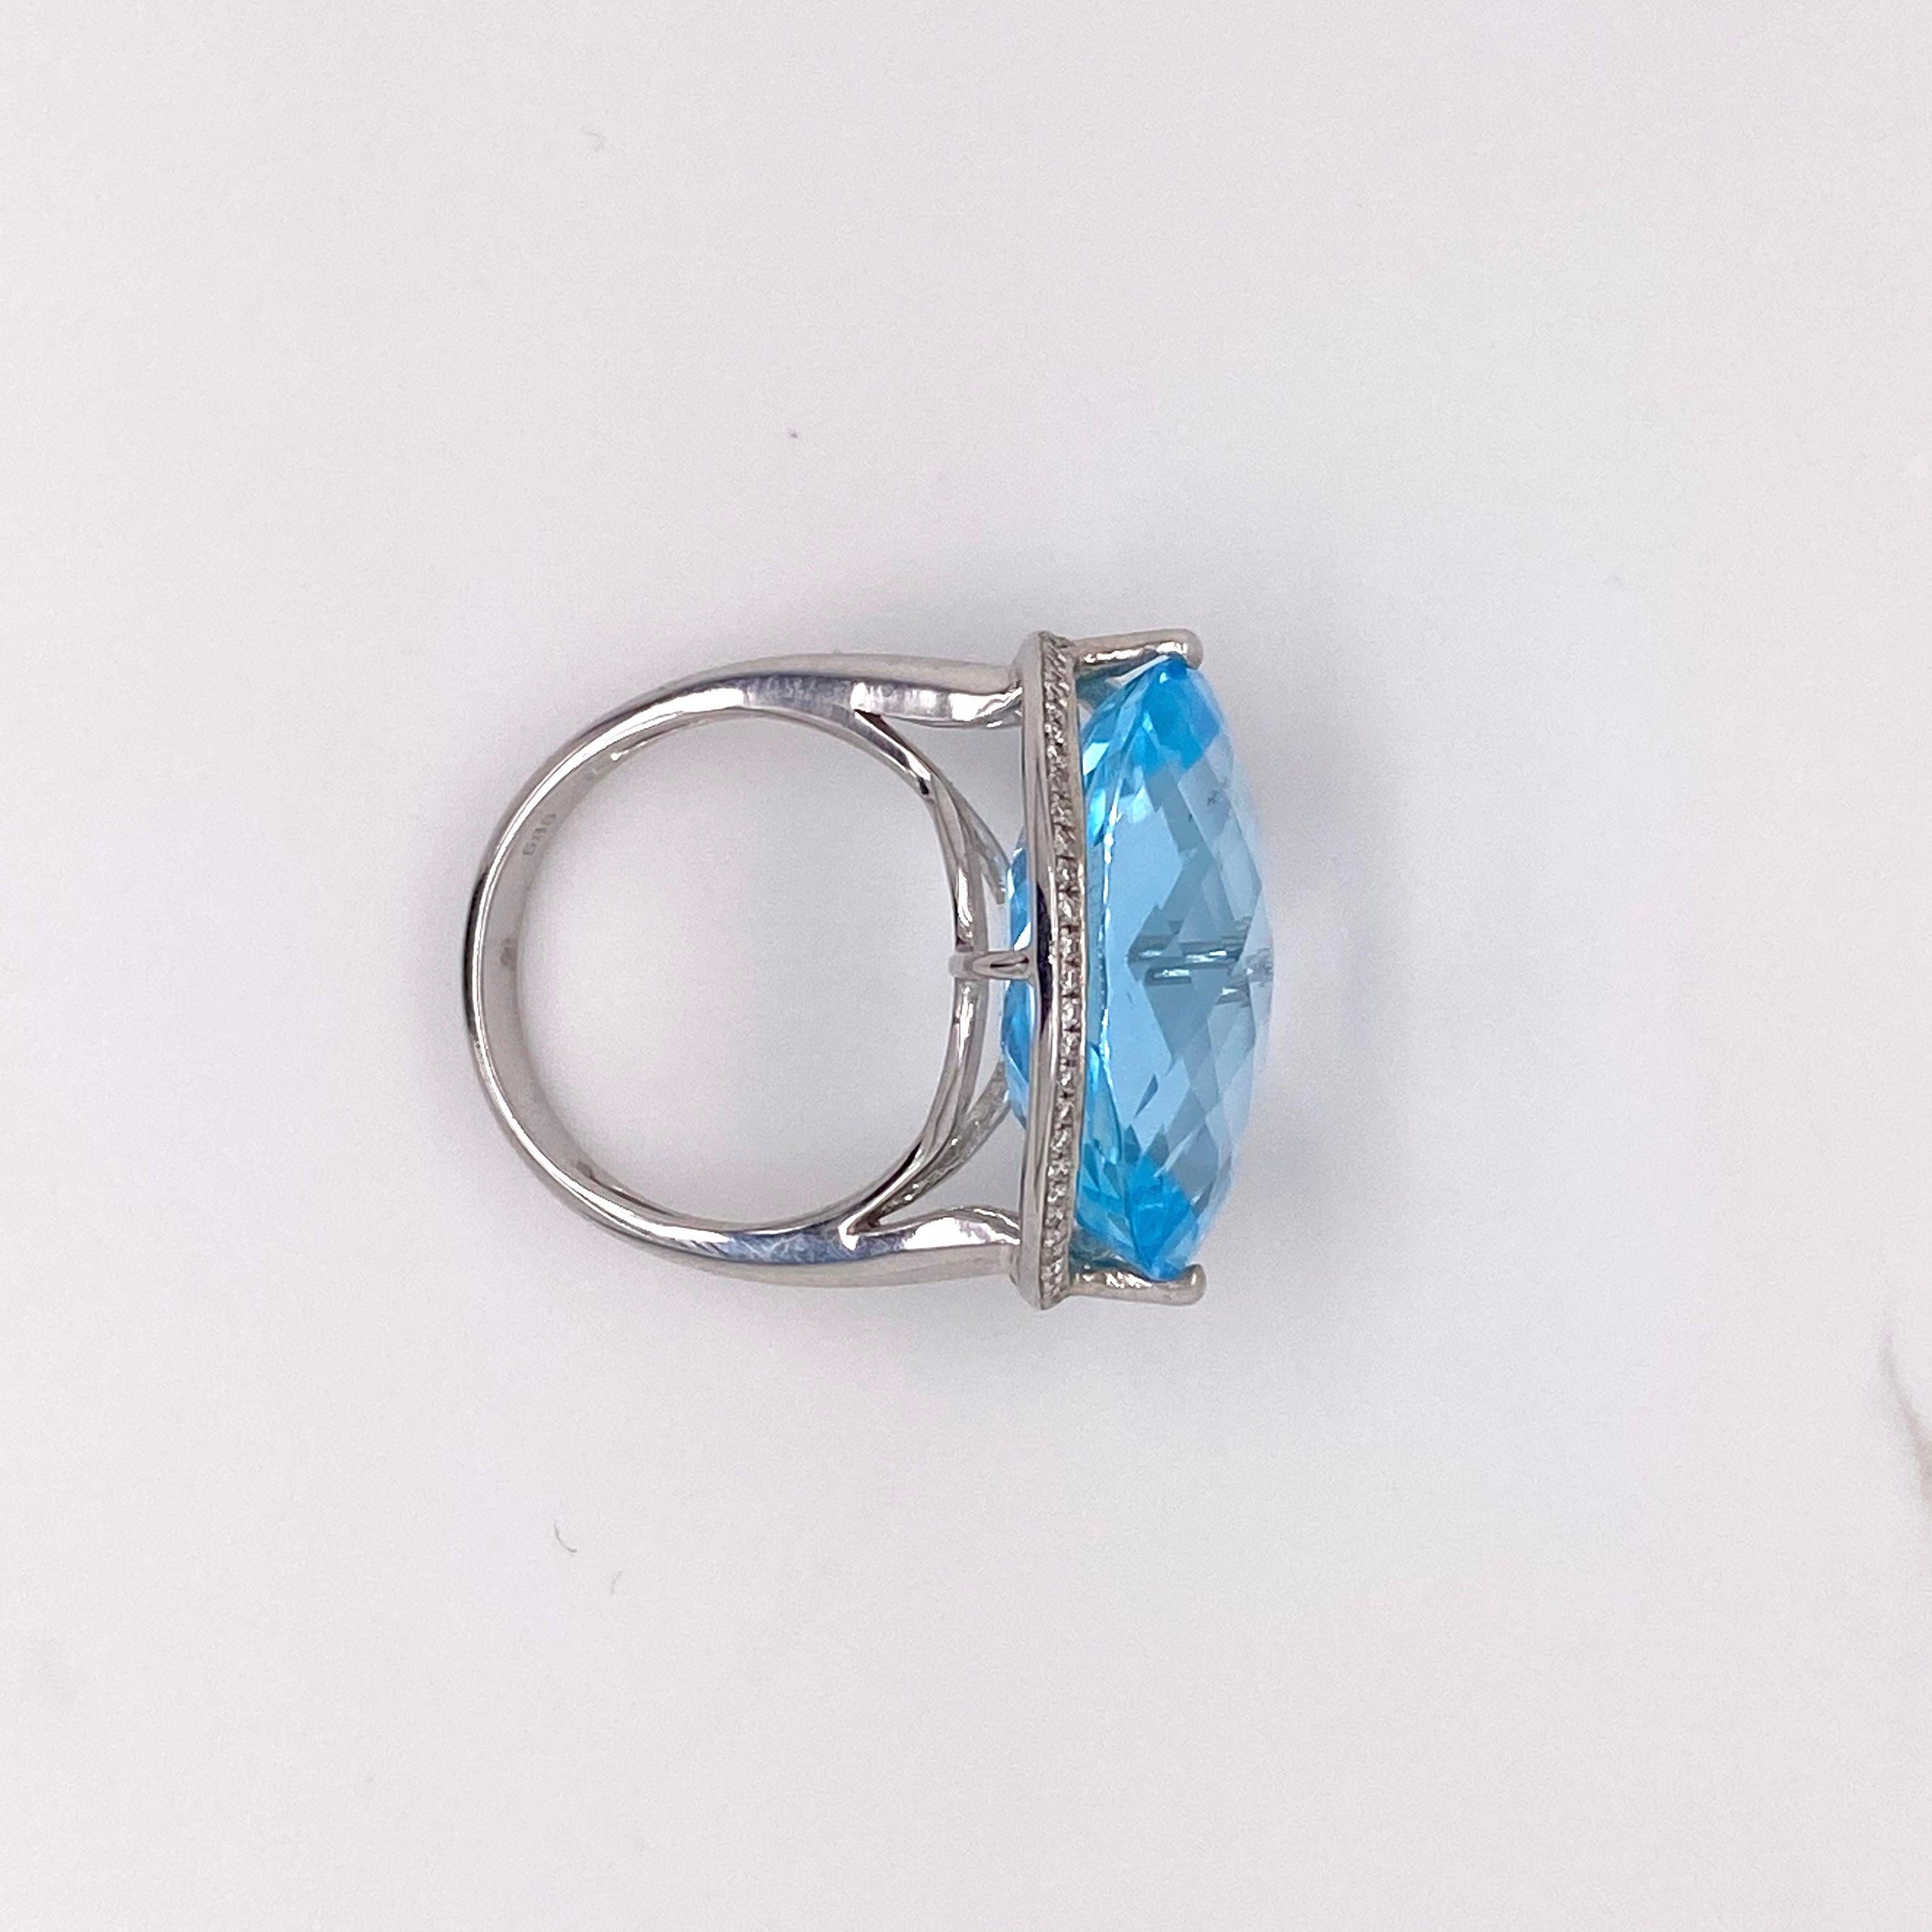 Blue Topaz Ring, with Diamonds White Gold, Genuine Checkerboard Cut Natural Gem 6